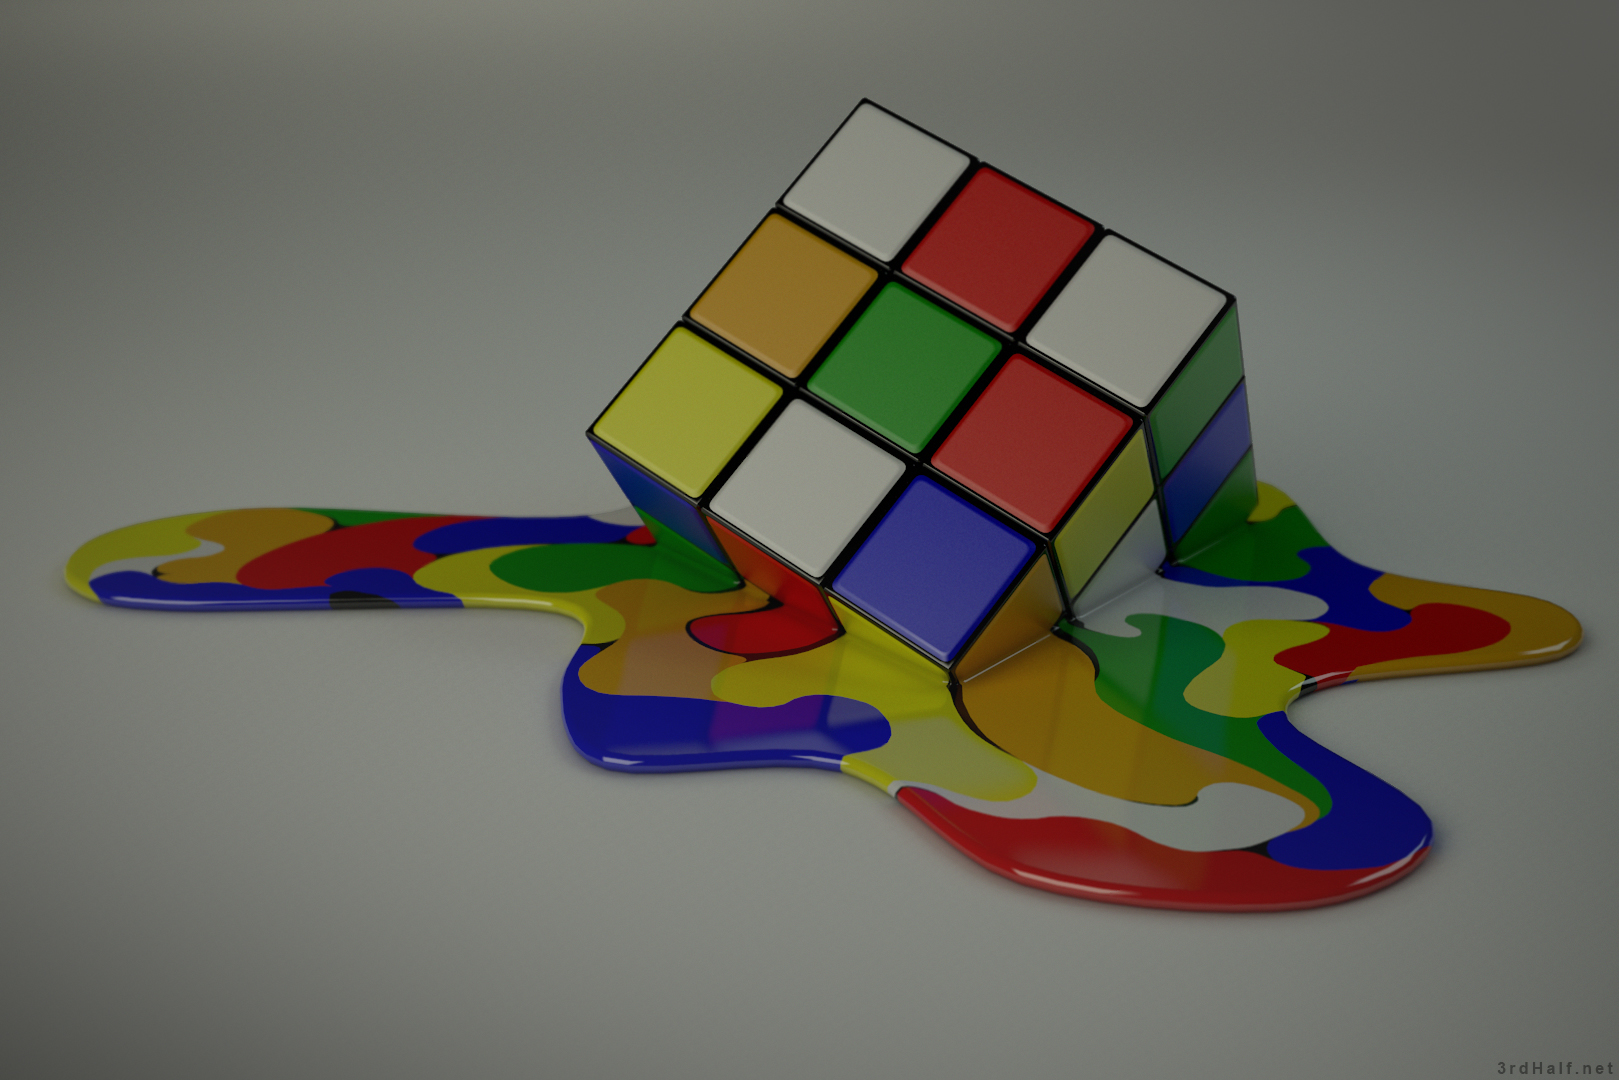 After roughly ten hours of modeling and few hours testing rendering 1619x1080